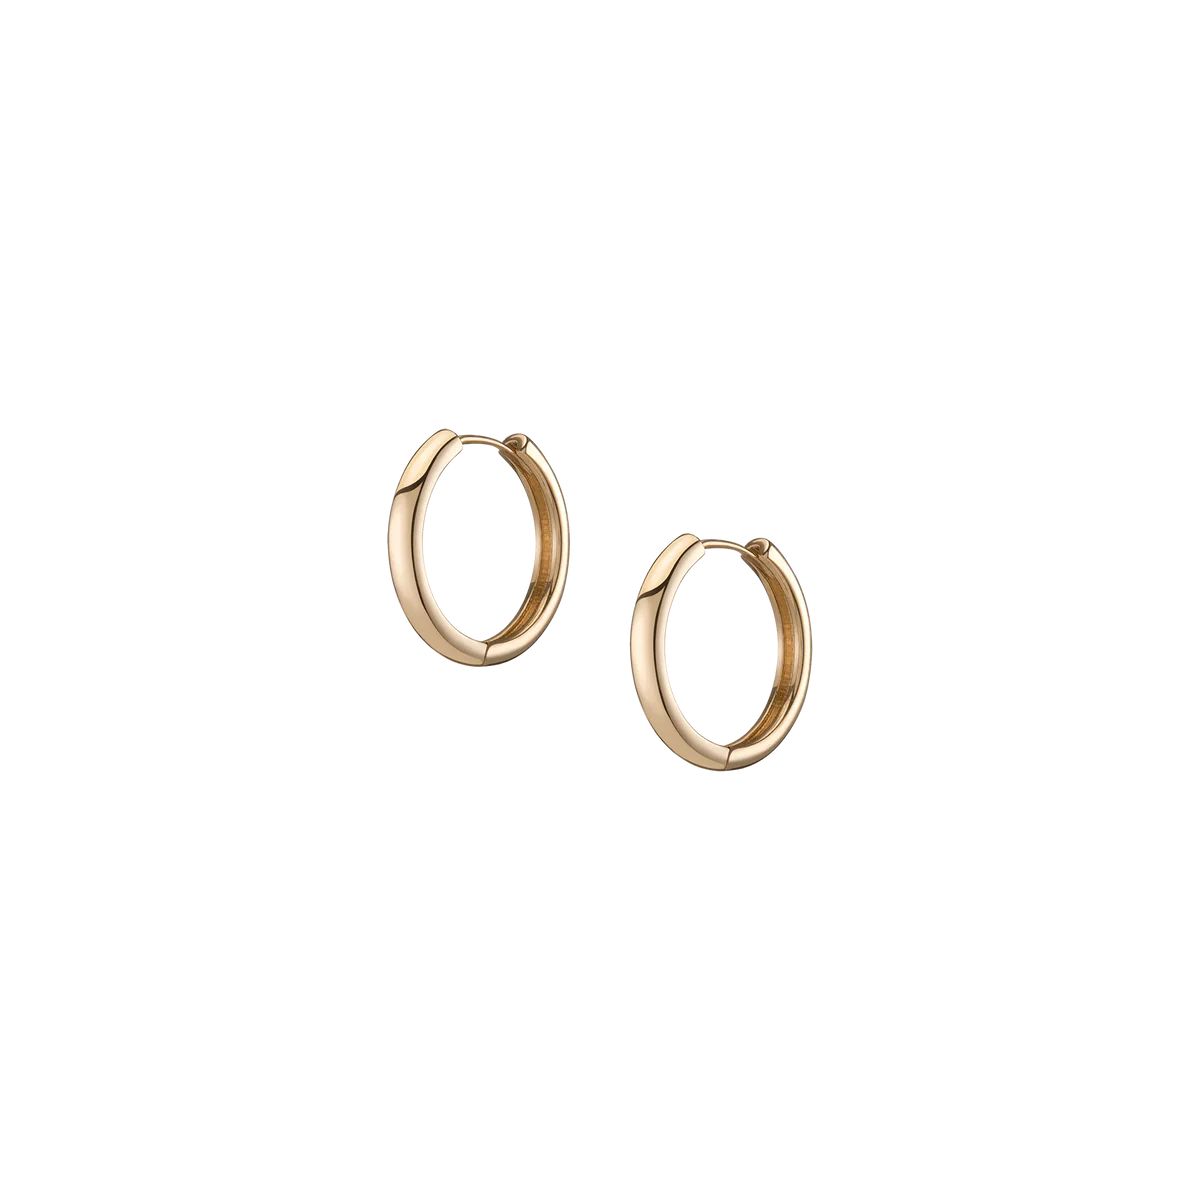 AURATE X KERRY: Lioness Gold Hoop Earrings | AUrate New York